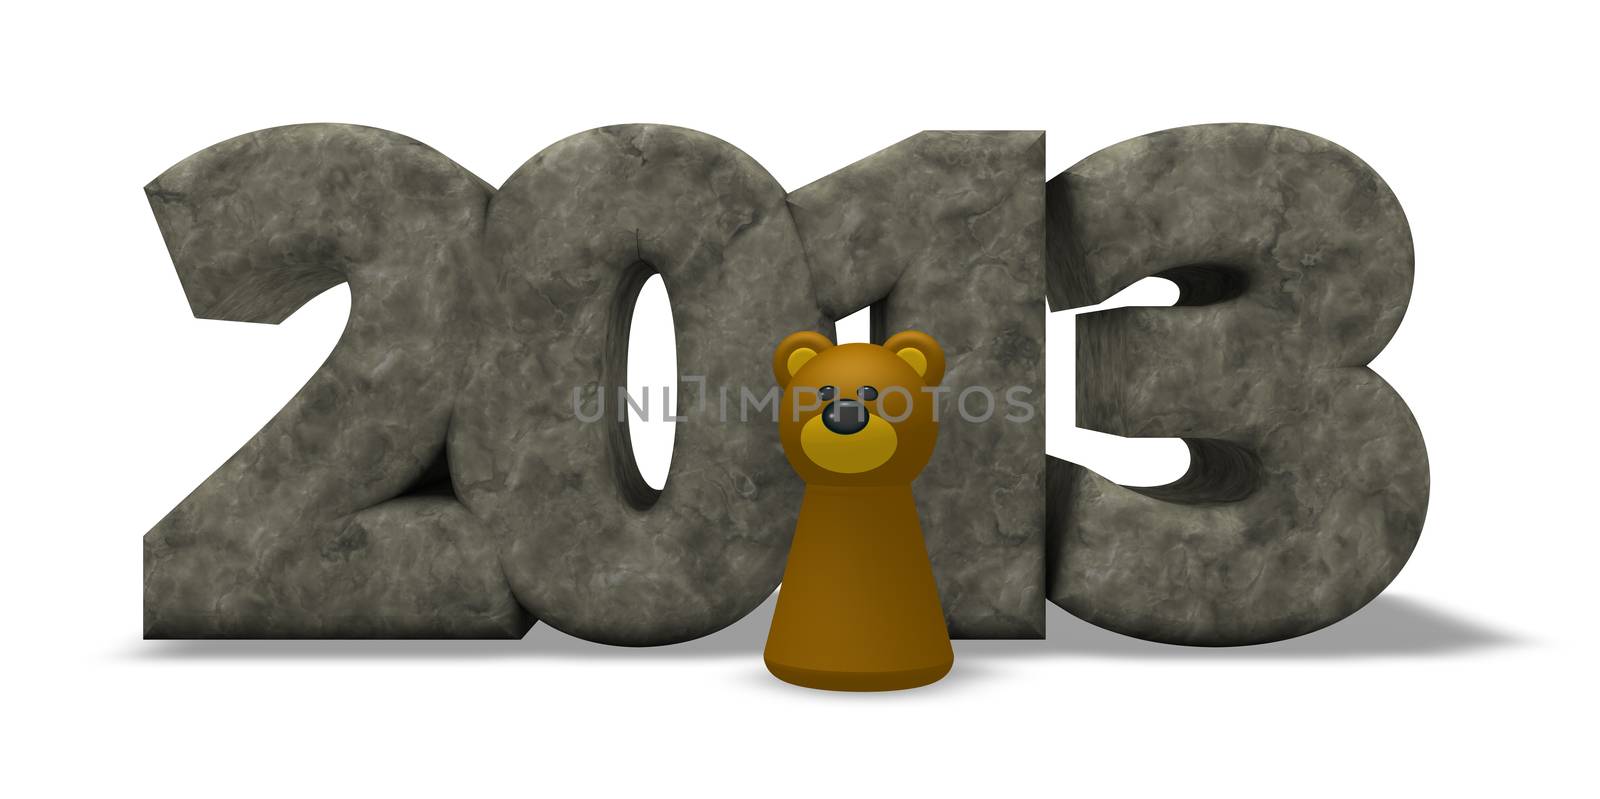 stone year number 2013 and bear - 3d illustration